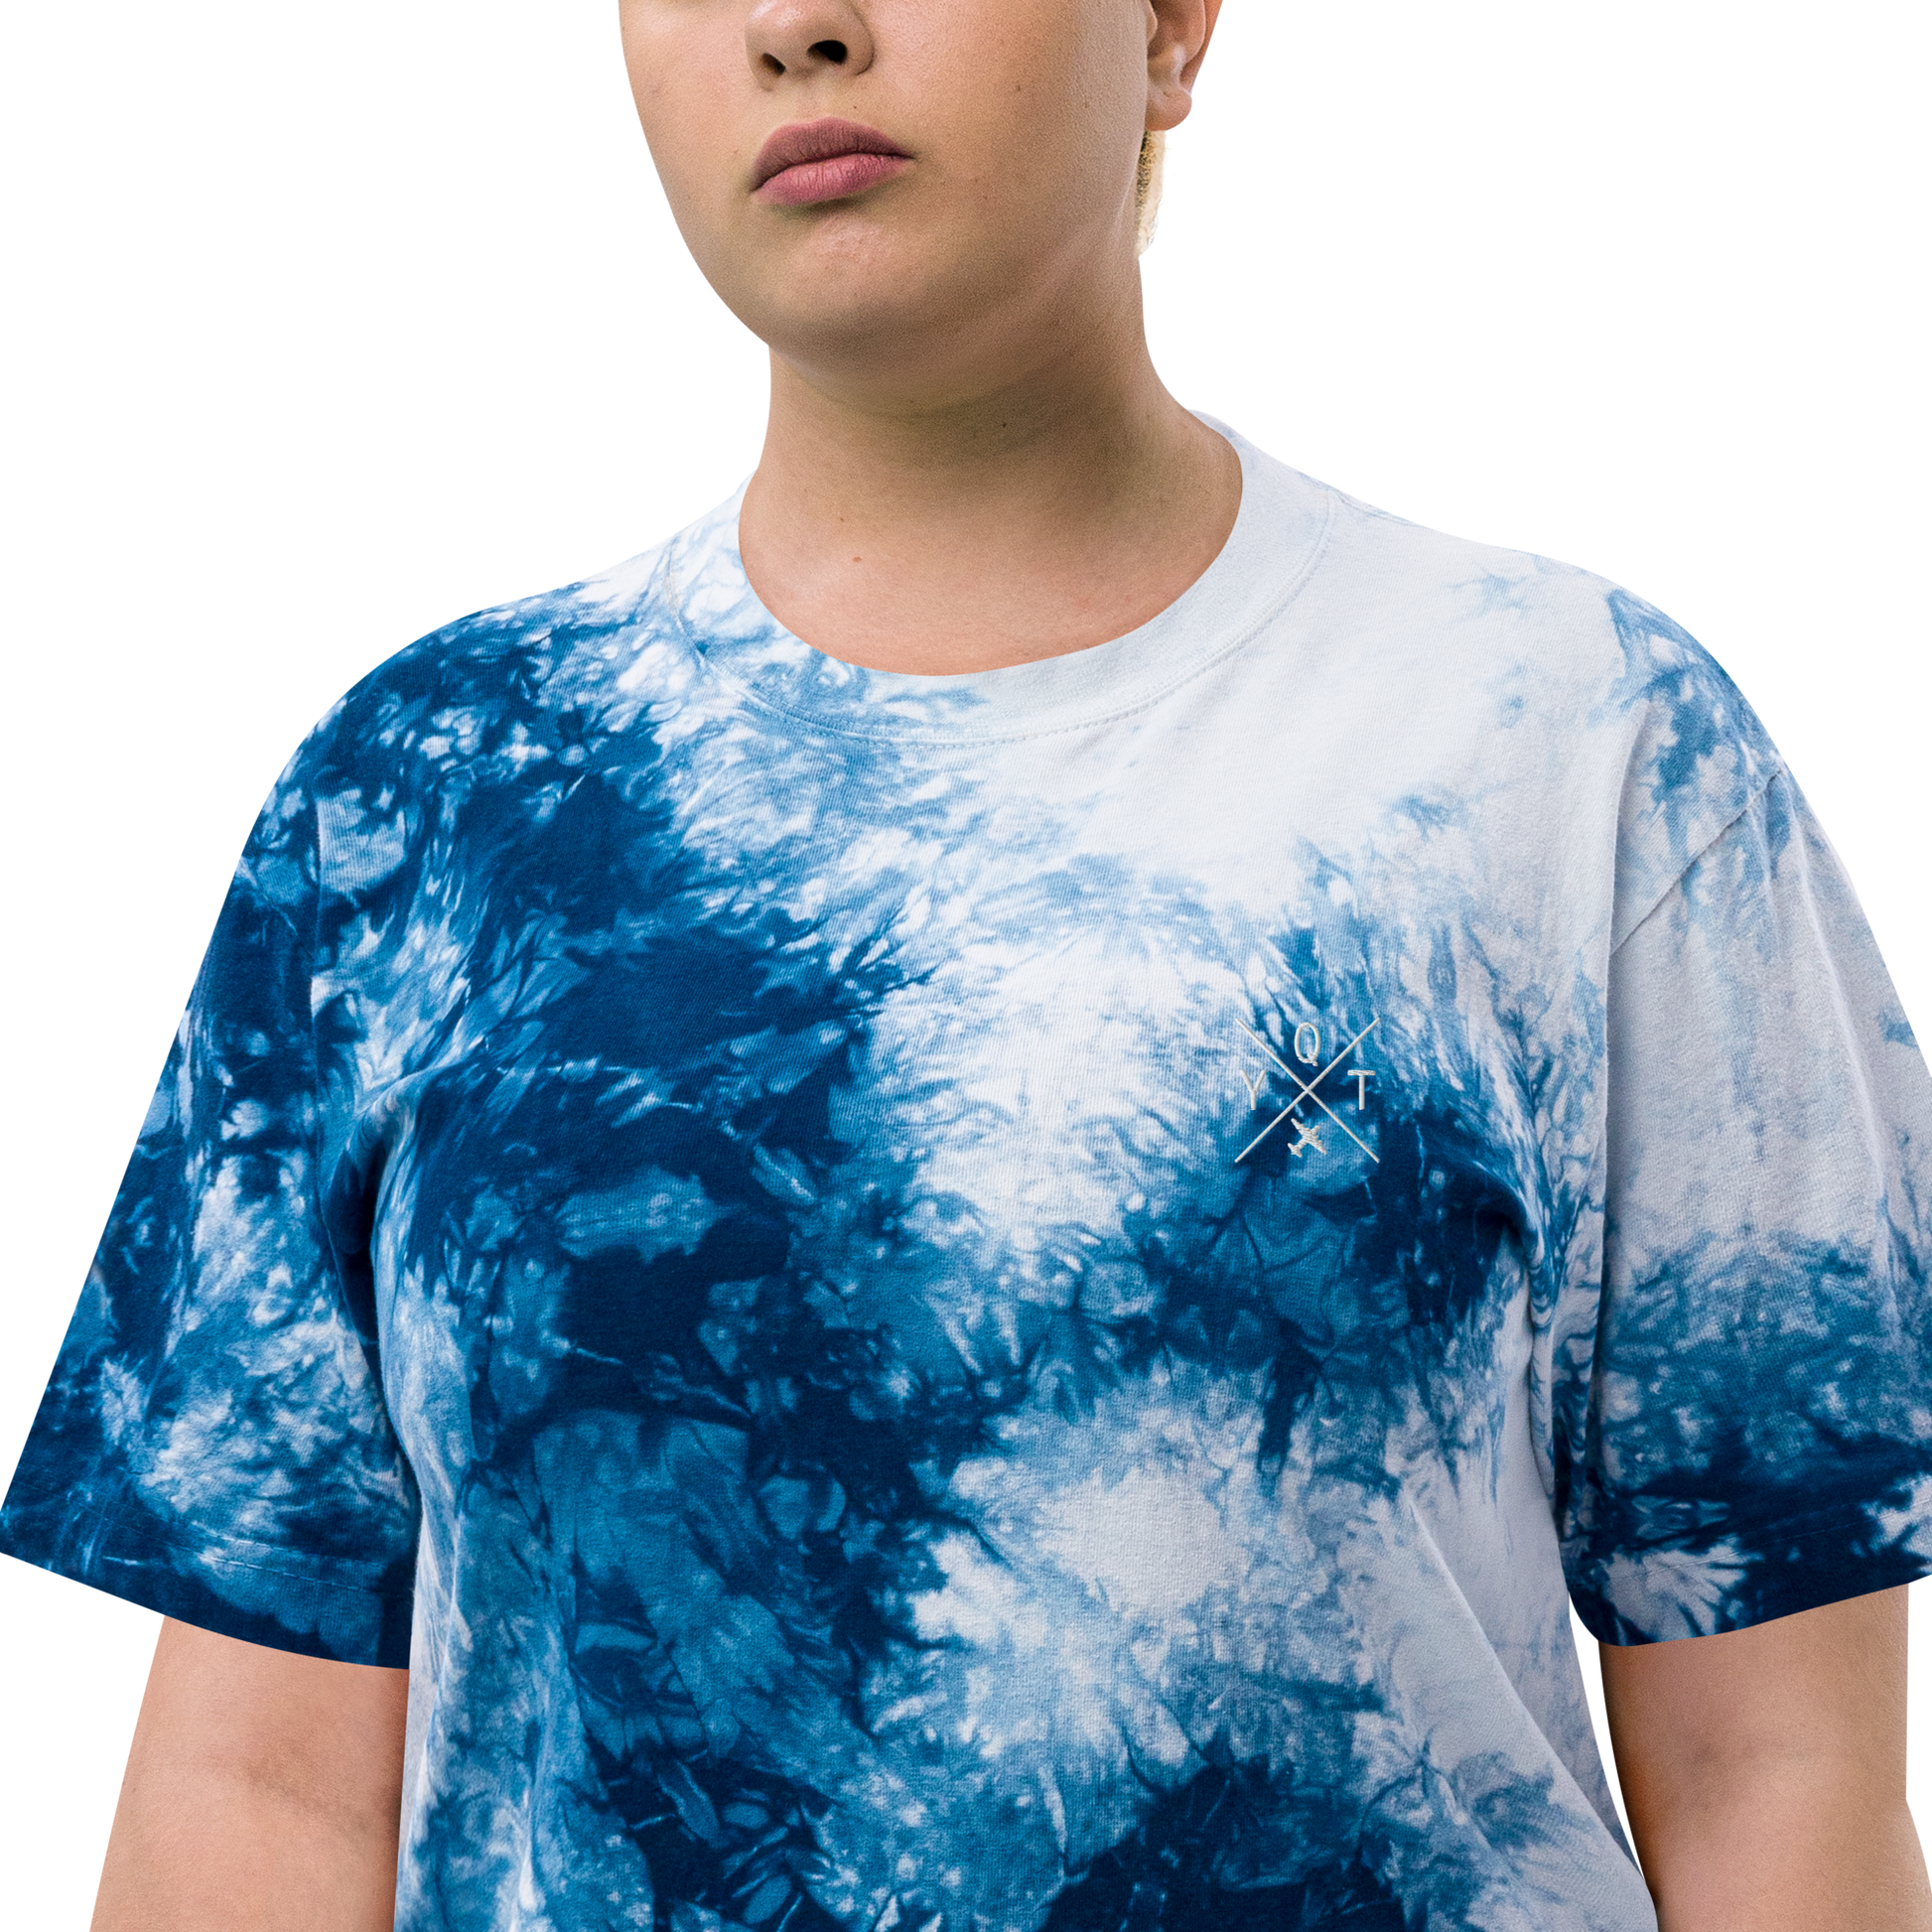 YHM Designs - YQT Thunder Bay Oversized Tie-Dye T-Shirt - Crossed-X Design with Airport Code and Vintage Propliner - White Embroidery - Image 10